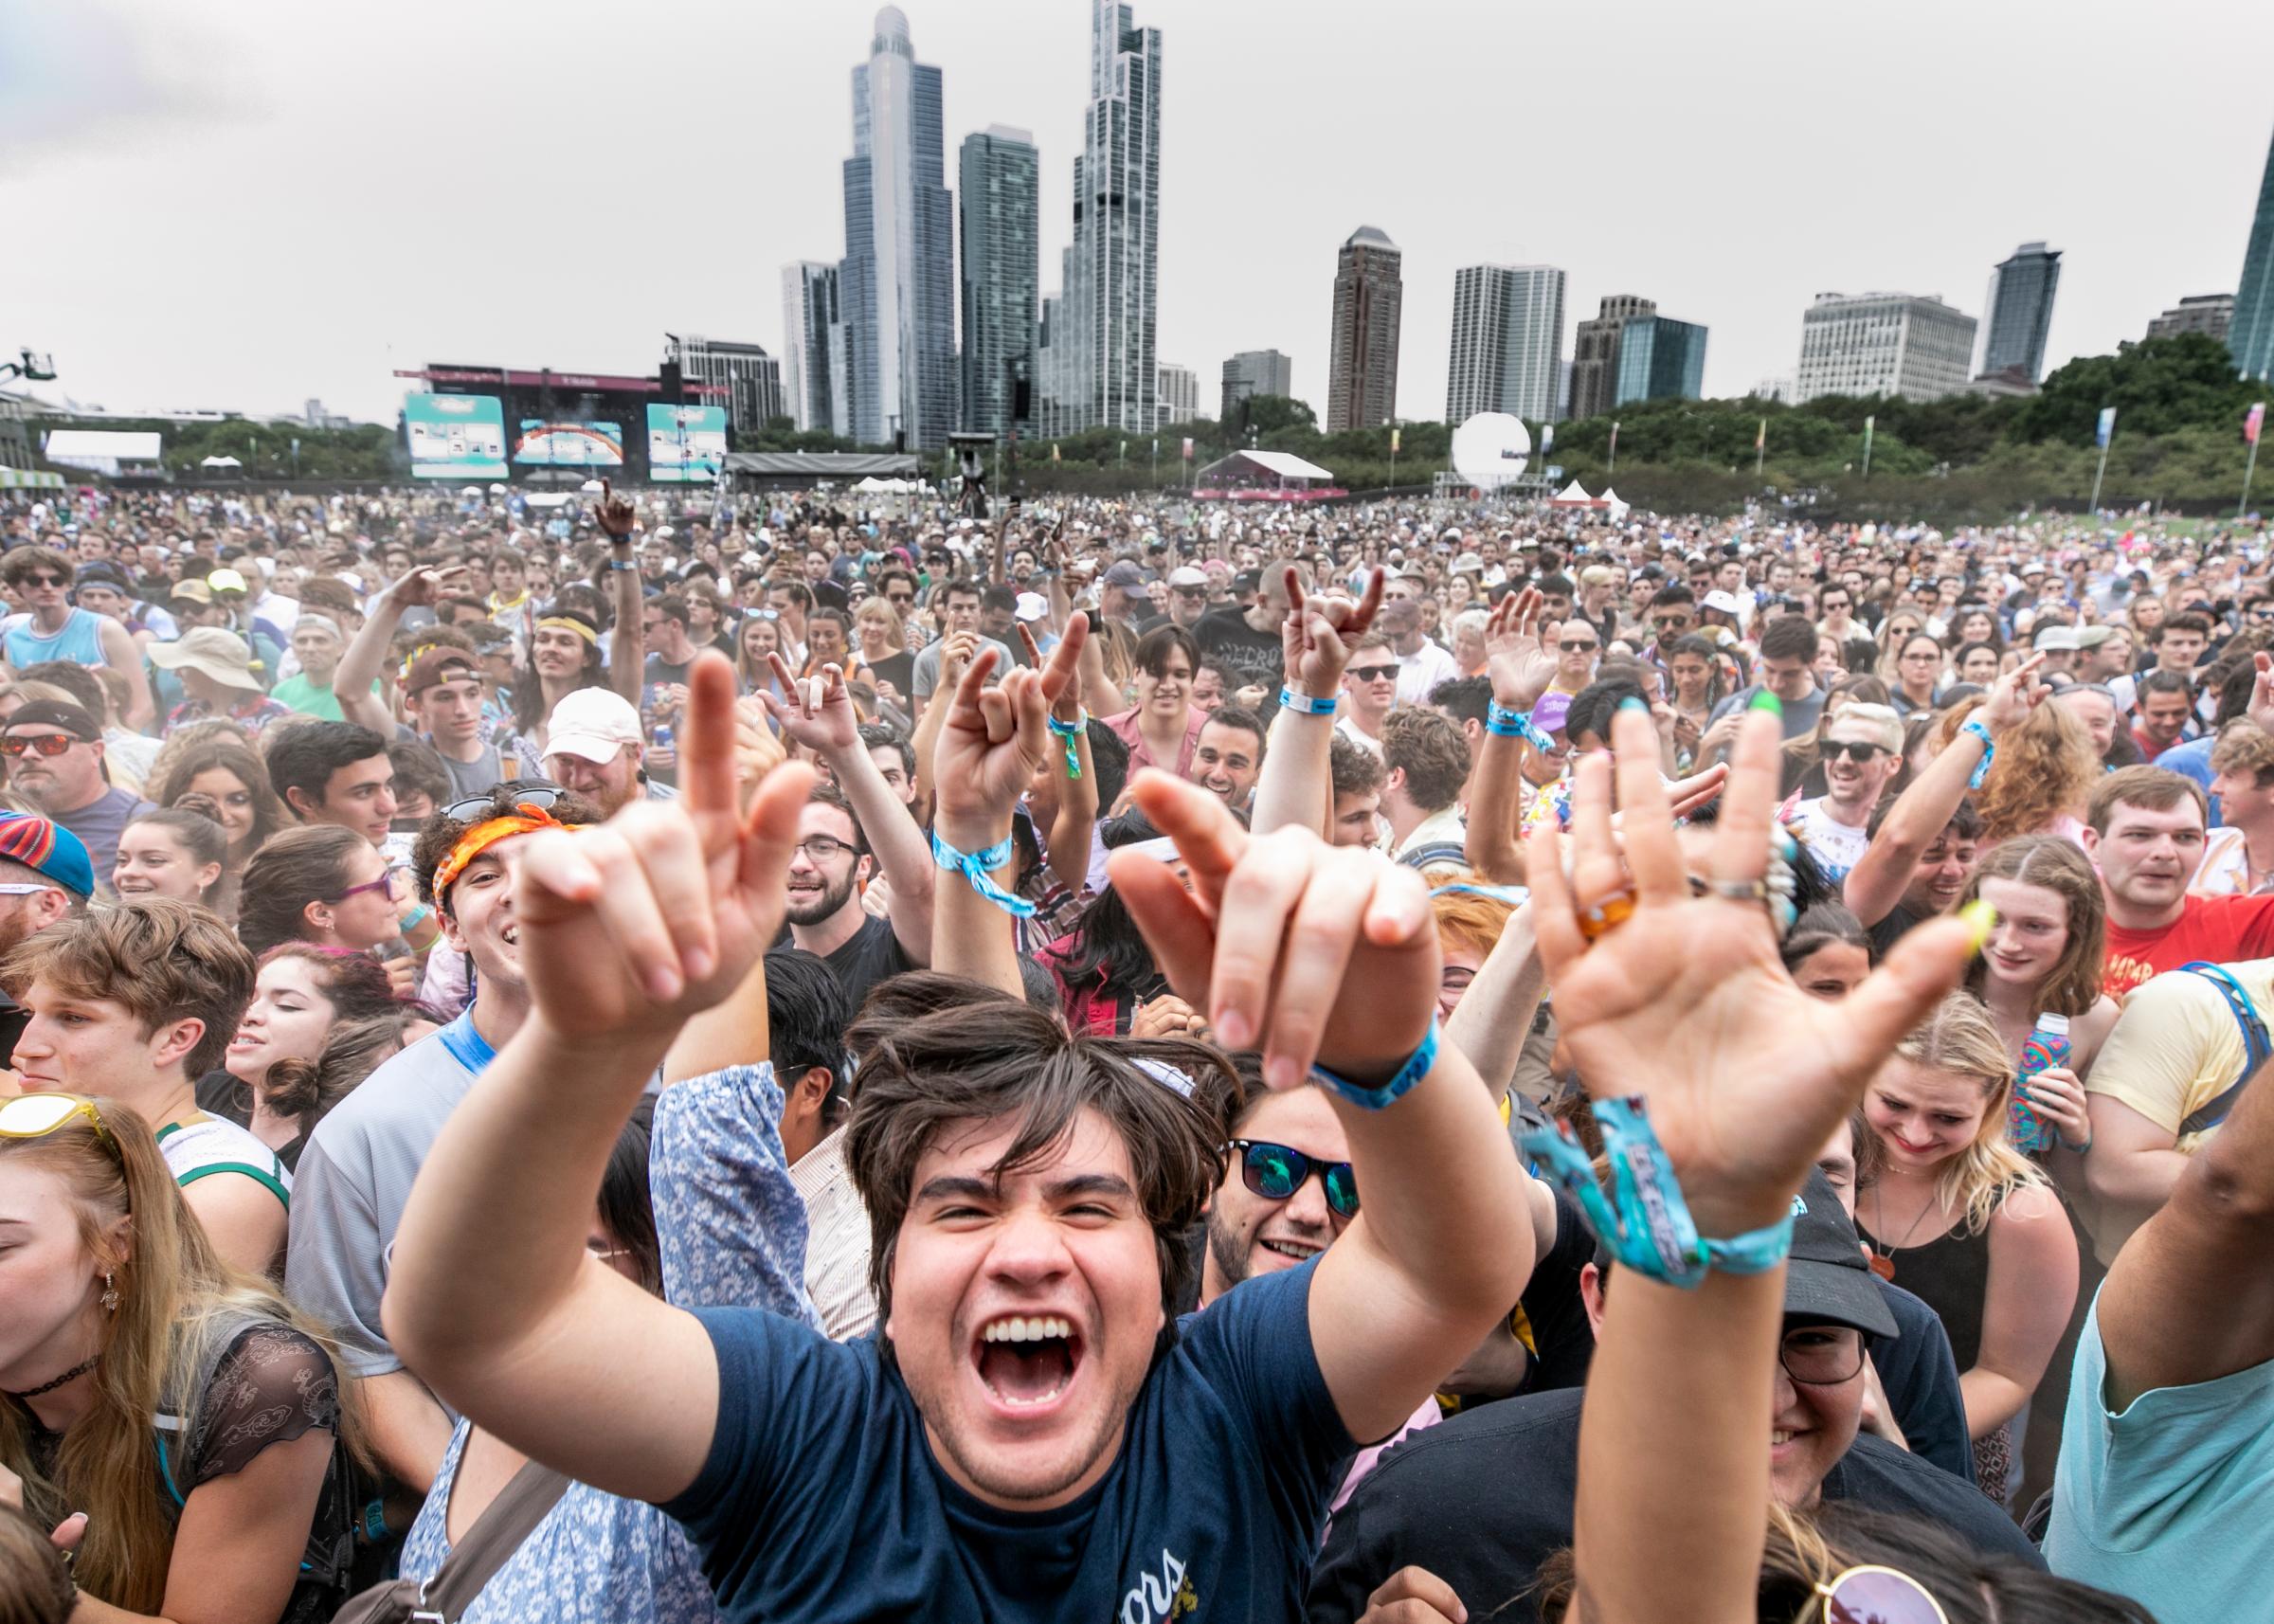 Festivalgoers attend day 2 of Lollapalooza at Grant Park in Chicago, on July 30, 2021.